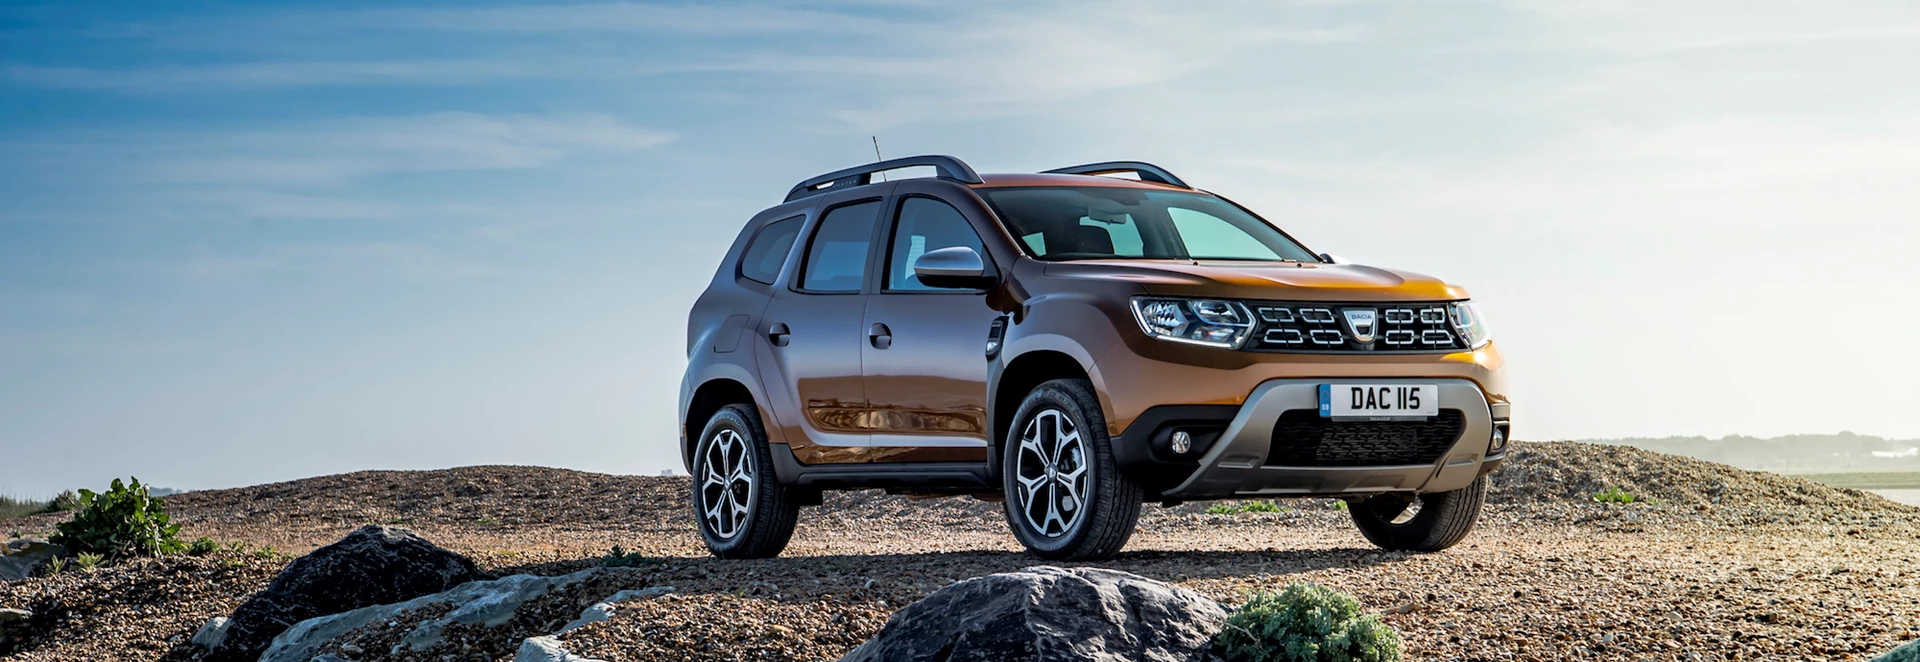 Dacia announces pricing for new Duster